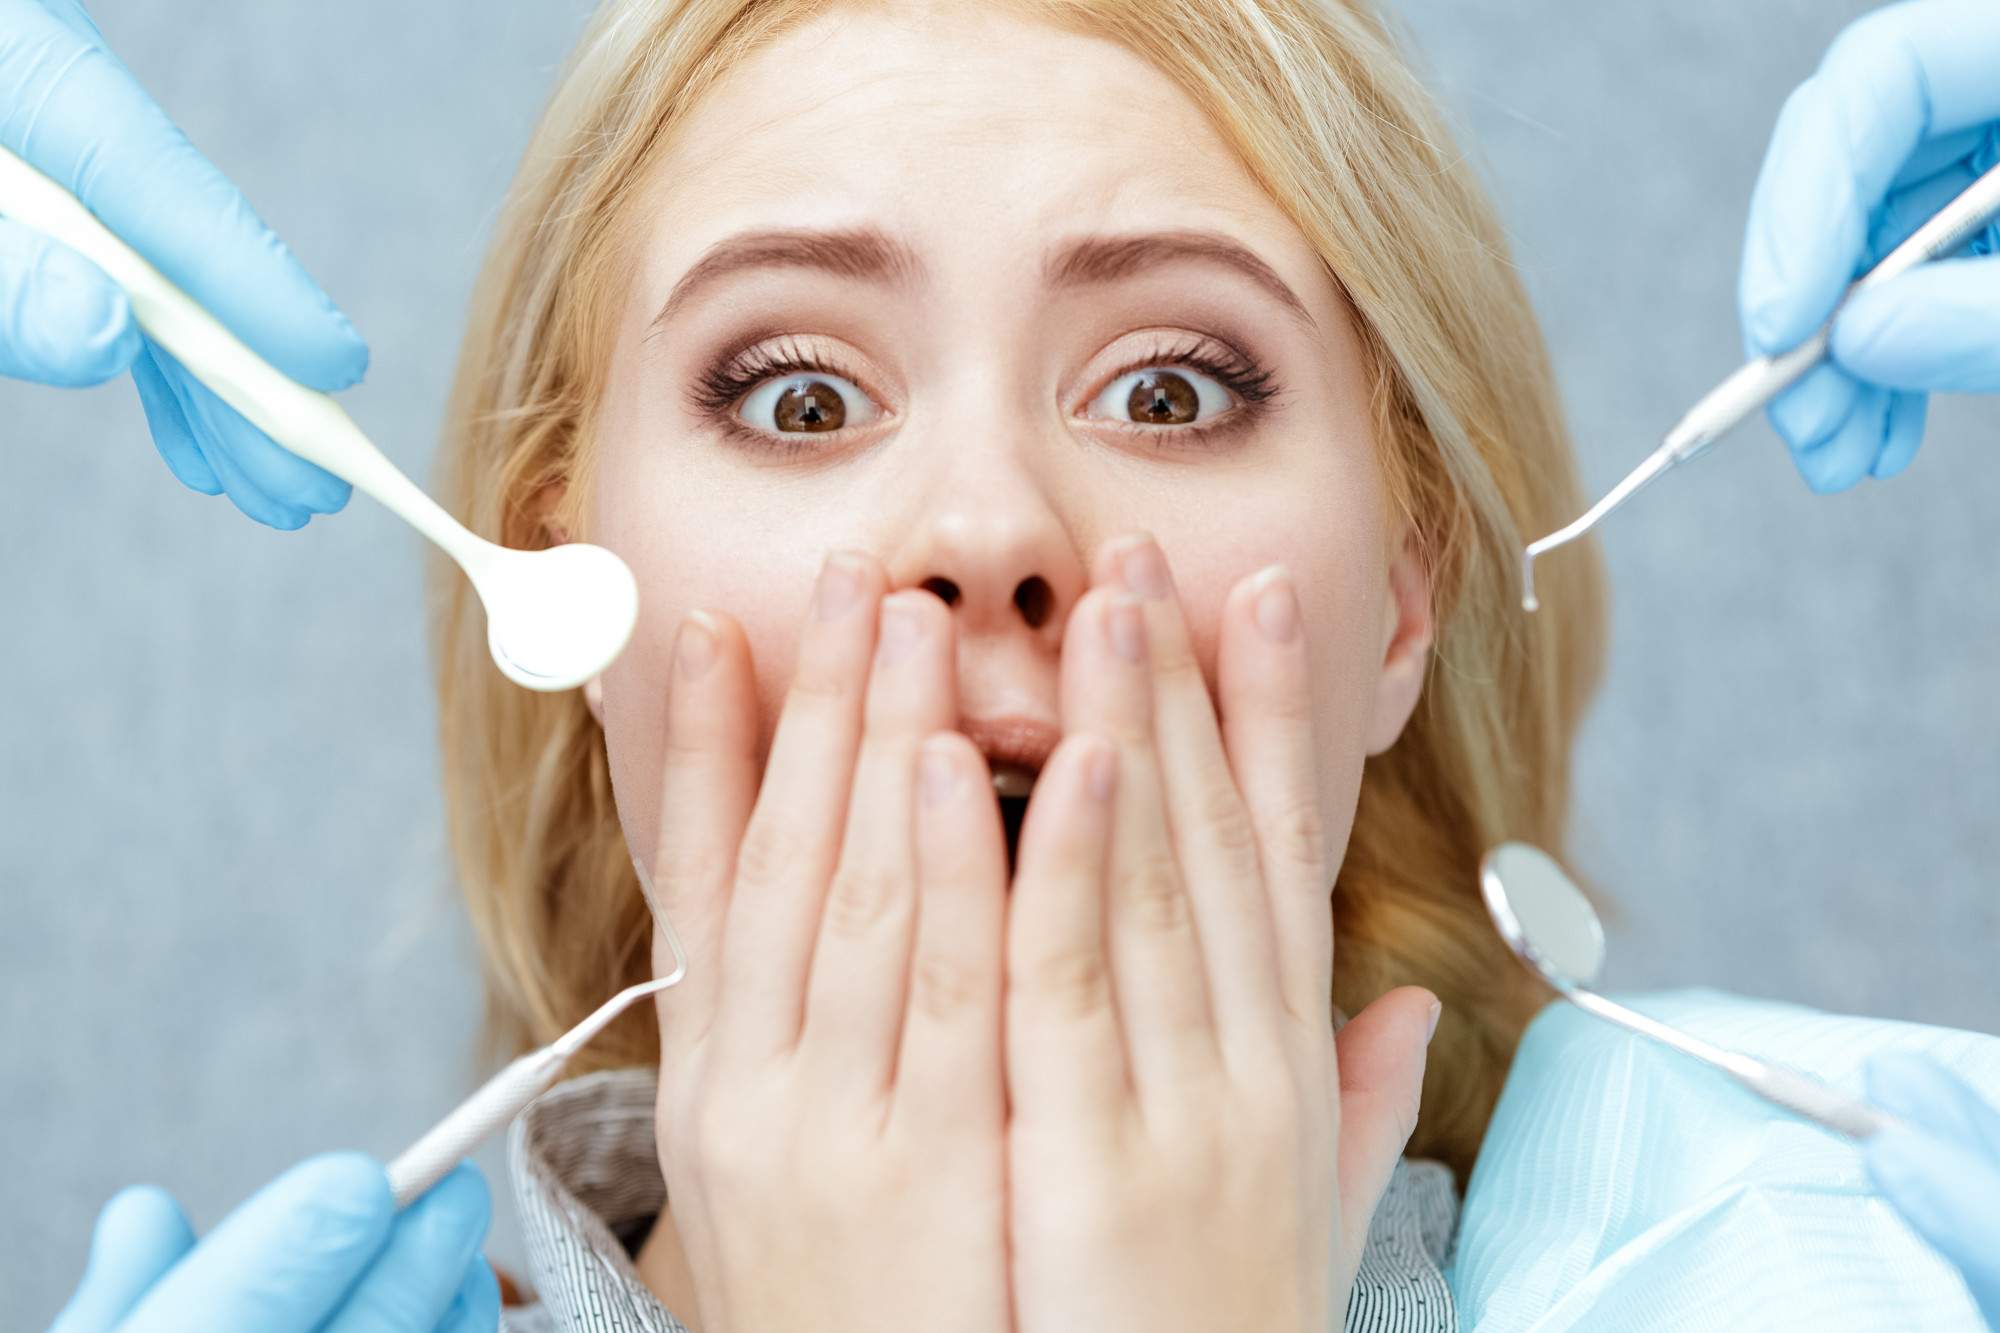 How to Overcome Fear With Dental Anxiety Management Techniques